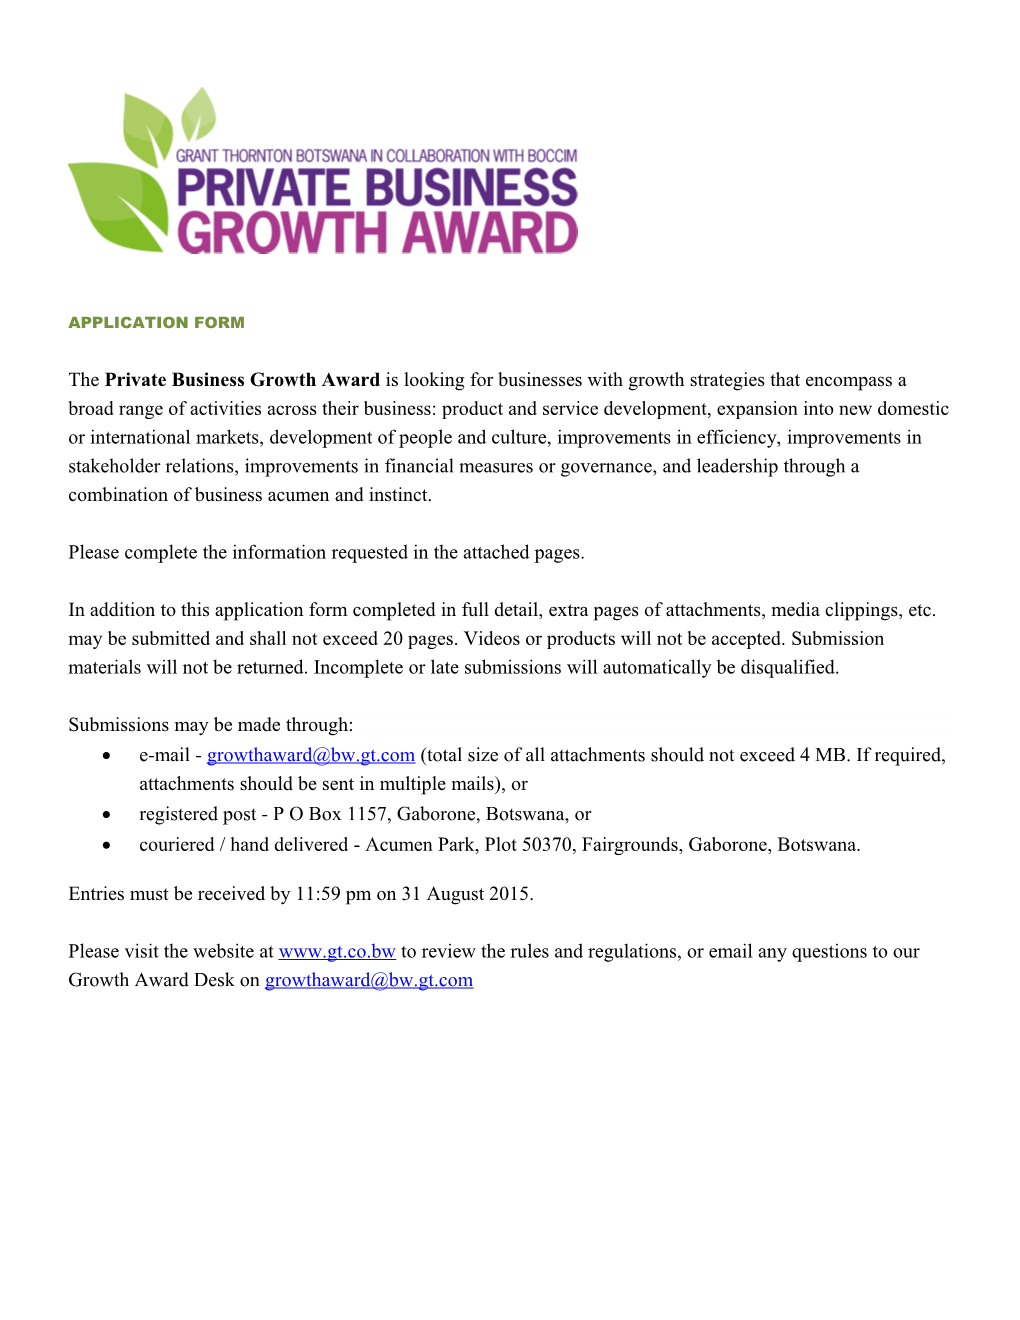 The Private Business Growth Award Application Package Page 1 of 8